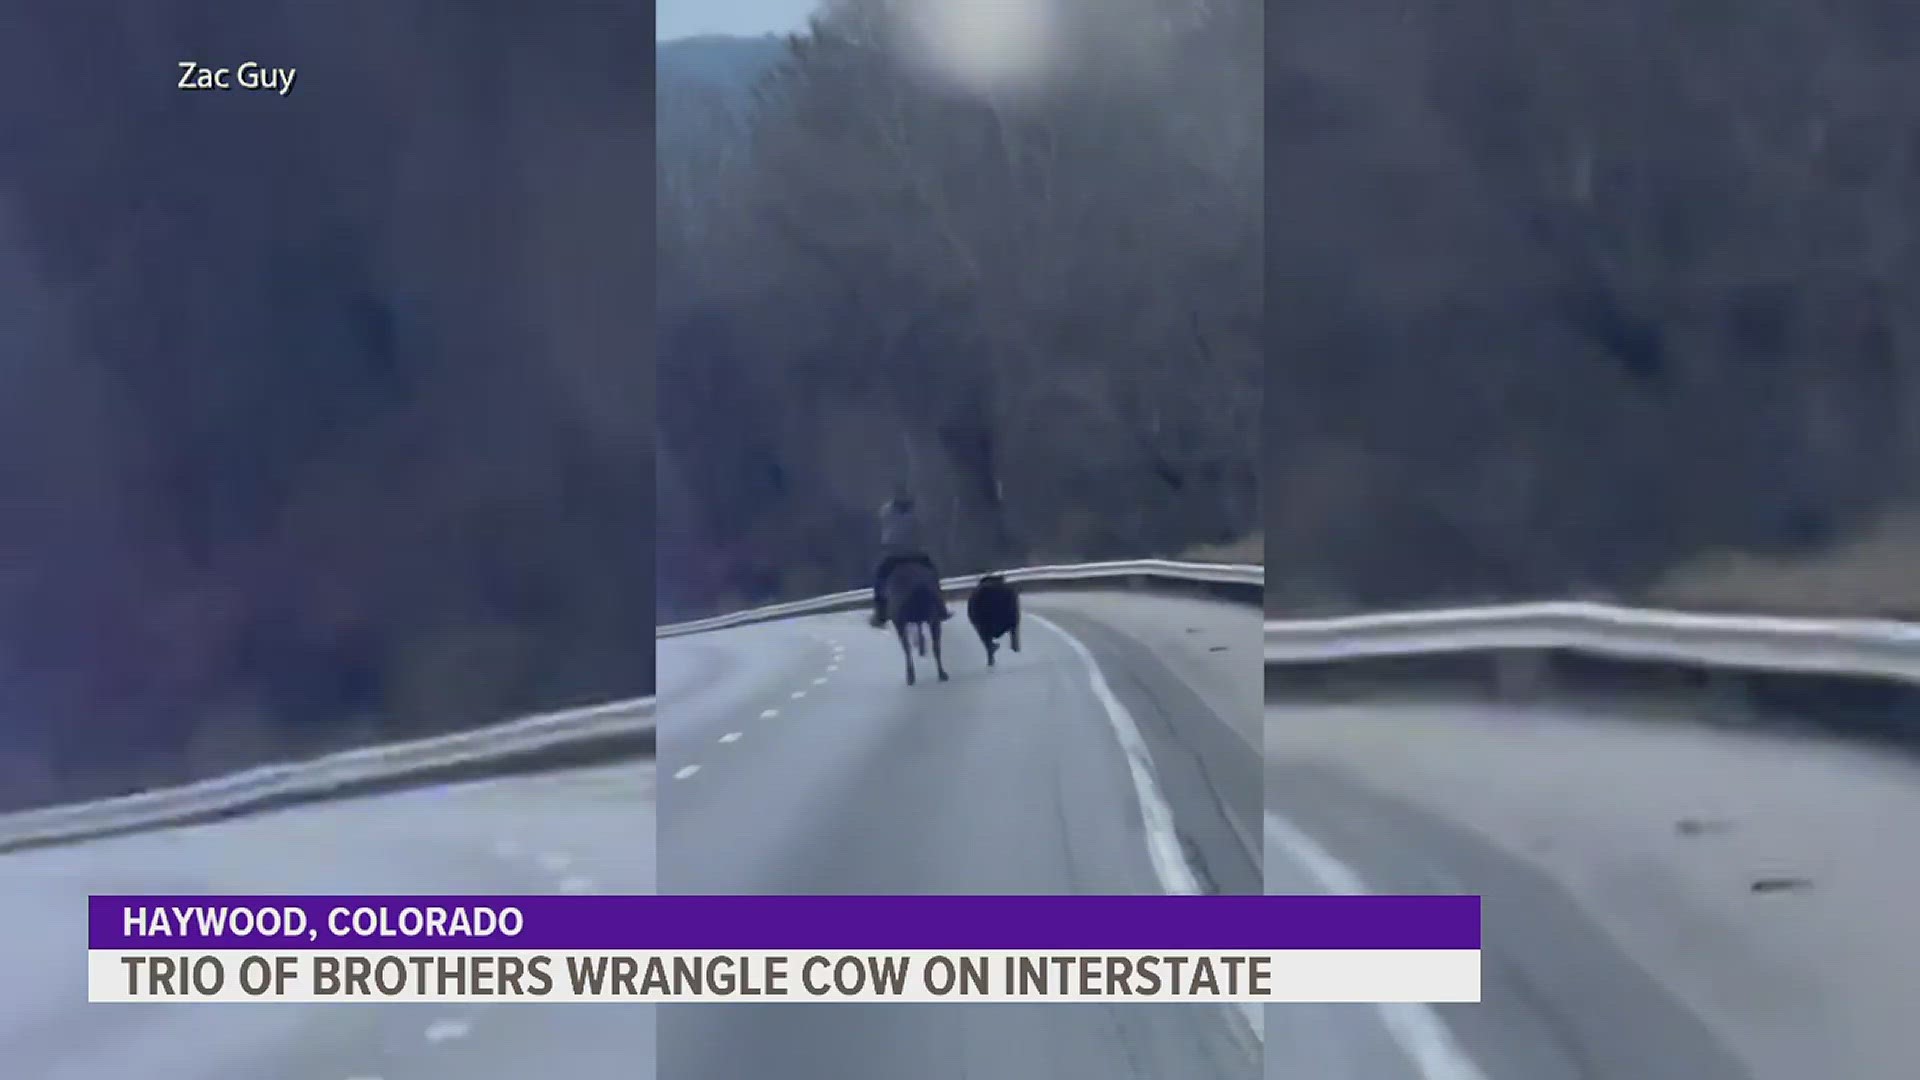 State troopers and semi-trucks had to block traffic as the roping-world-champion brothers charged in on horseback to save the runaway cow.